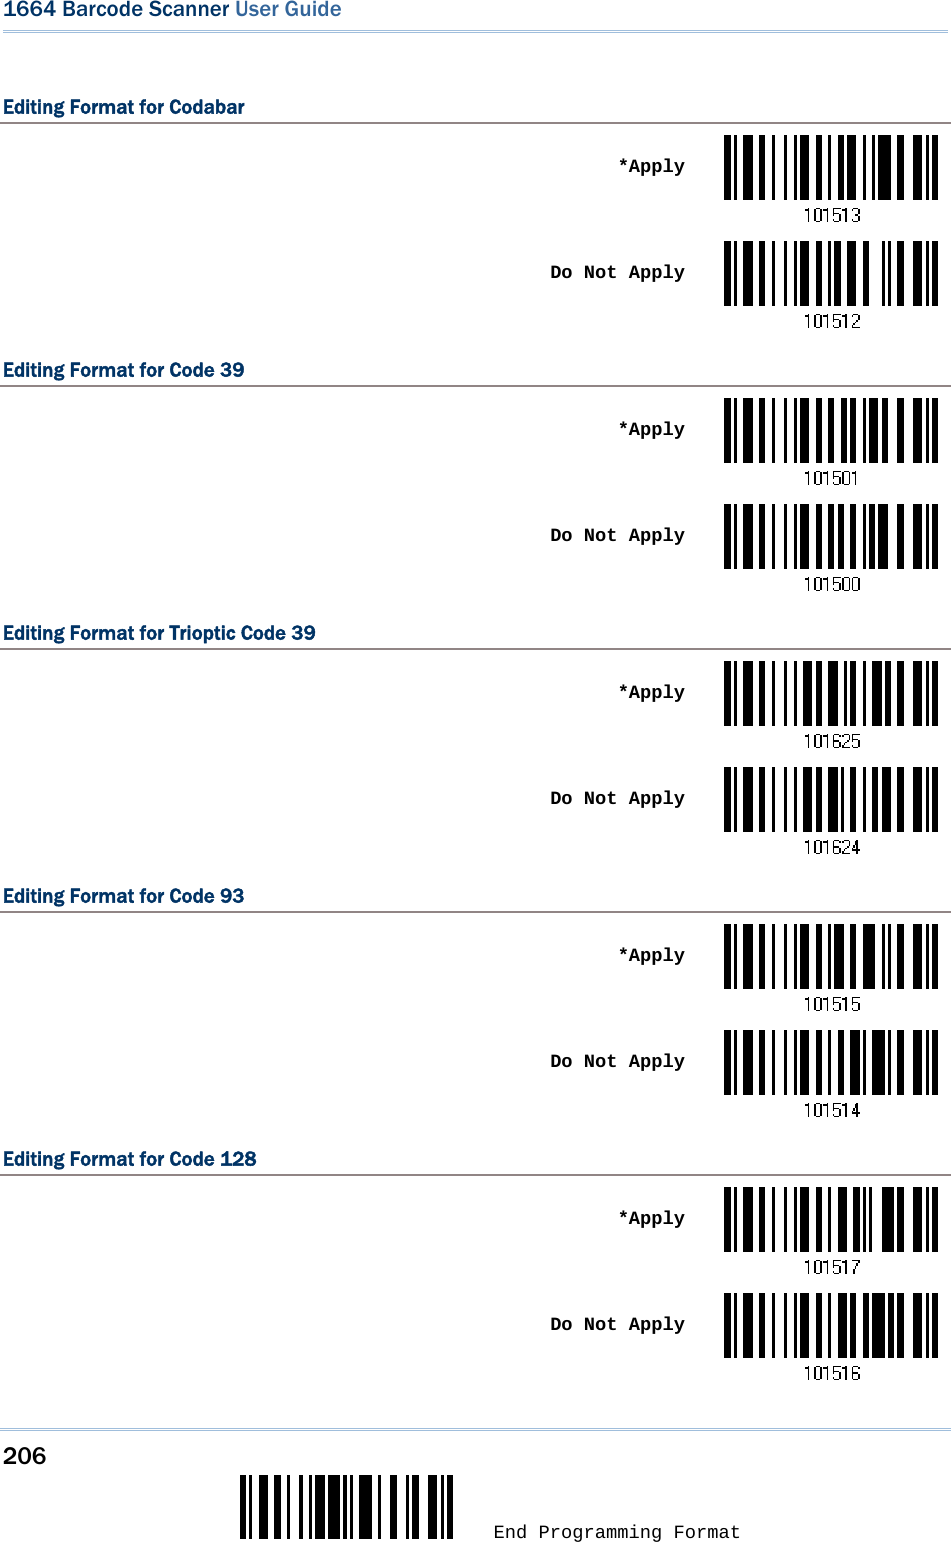 206  End Programming Format 1664 Barcode Scanner User Guide  Editing Format for Codabar  *Apply Do Not ApplyEditing Format for Code 39  *Apply Do Not ApplyEditing Format for Trioptic Code 39  *Apply Do Not ApplyEditing Format for Code 93  *Apply Do Not ApplyEditing Format for Code 128  *Apply Do Not Apply